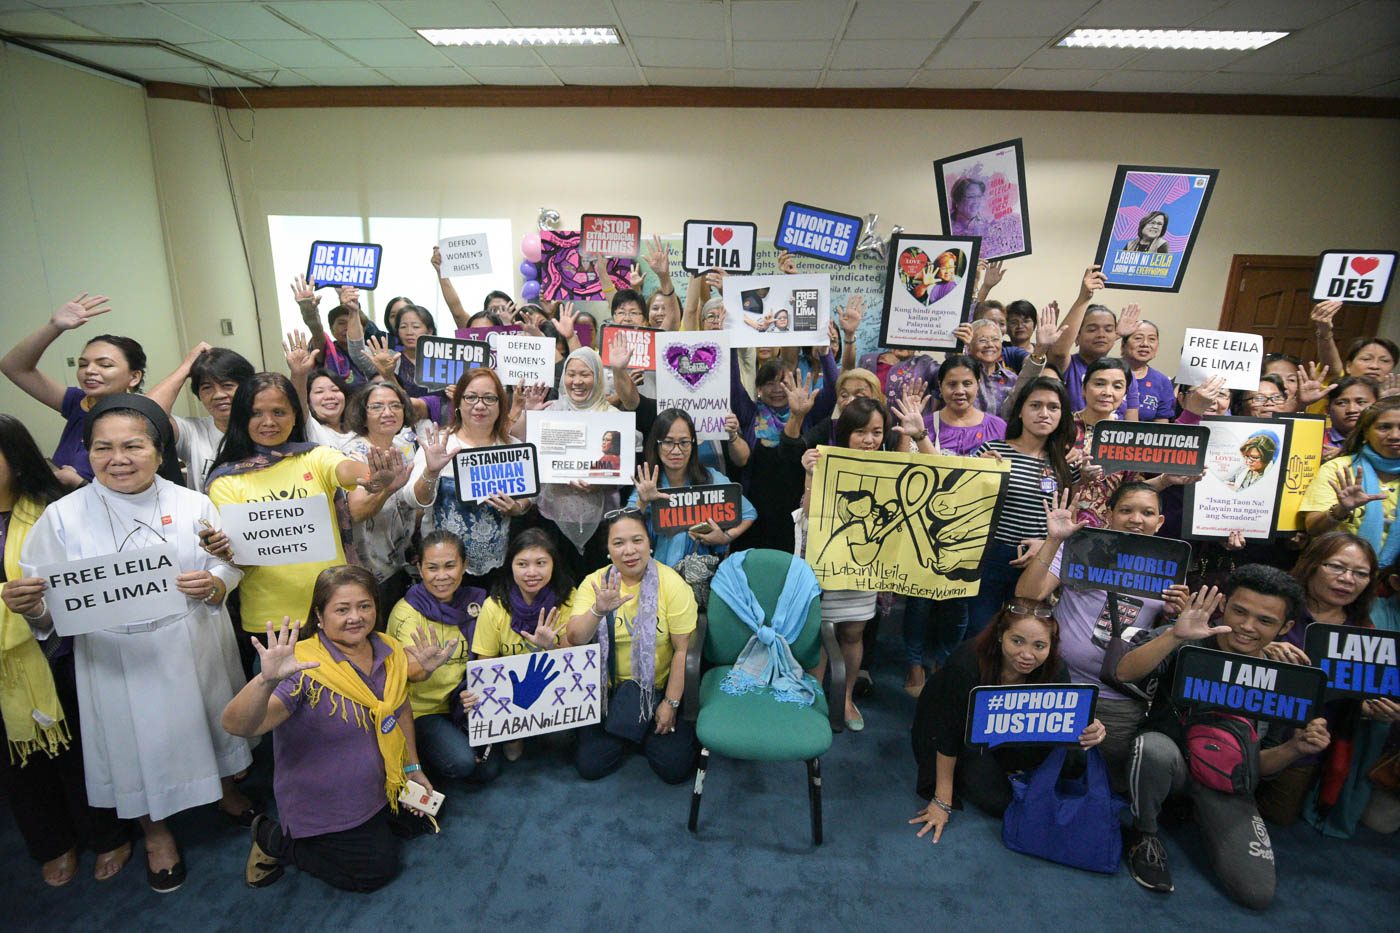 De Lima supporters call for her release after a year in jail